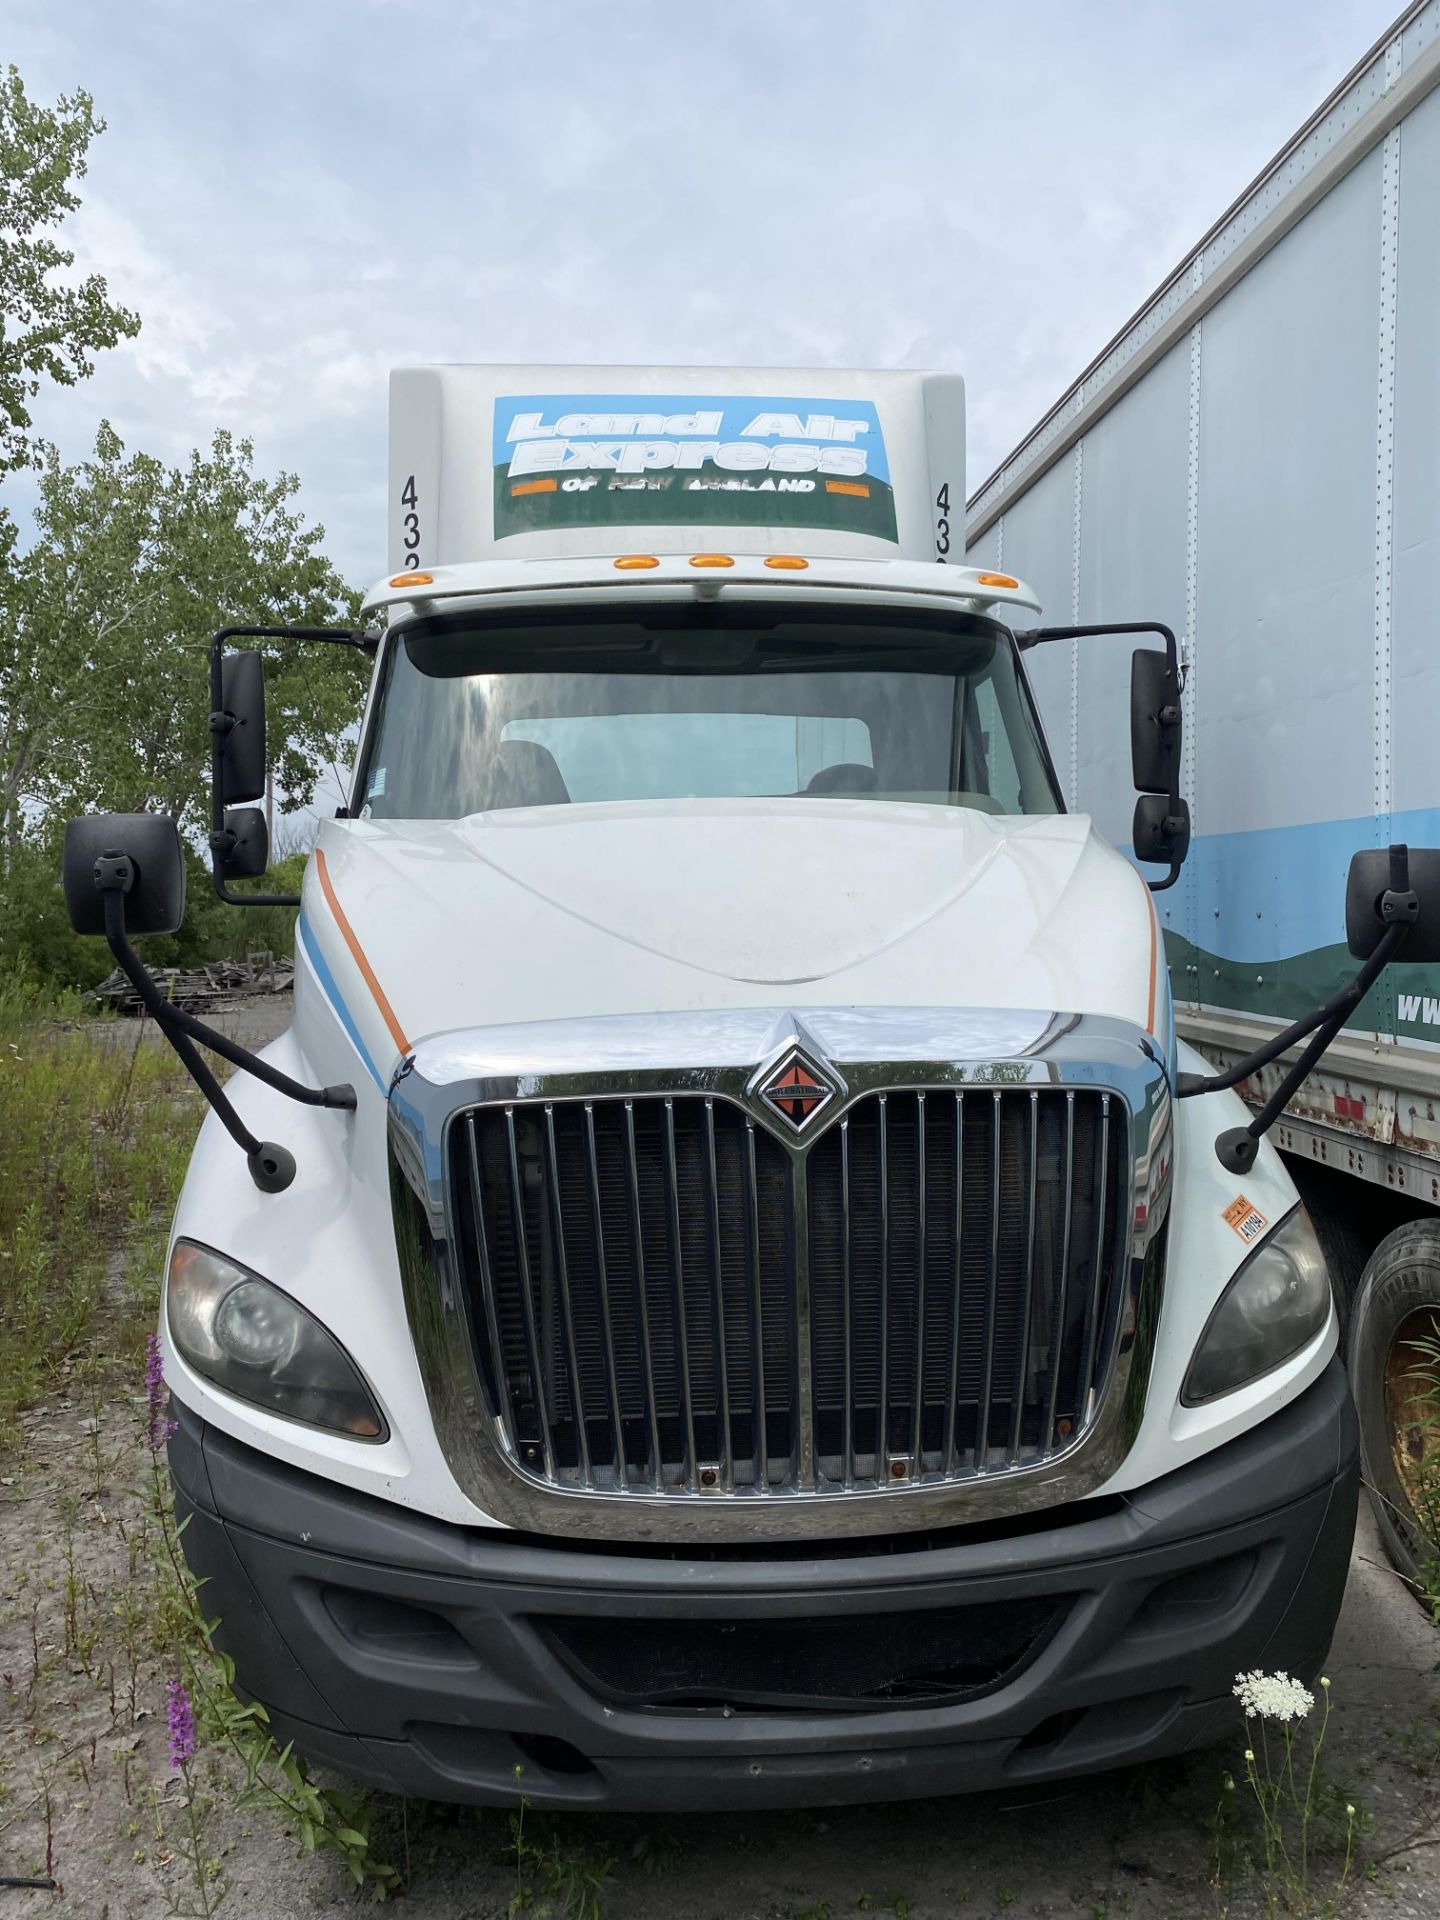 2013 International Prostar +, 6 Wheel, Auto Transmission, 4 x 2 Tractor PARTS TRUCK ONLY **NO TITLE* - Image 2 of 9